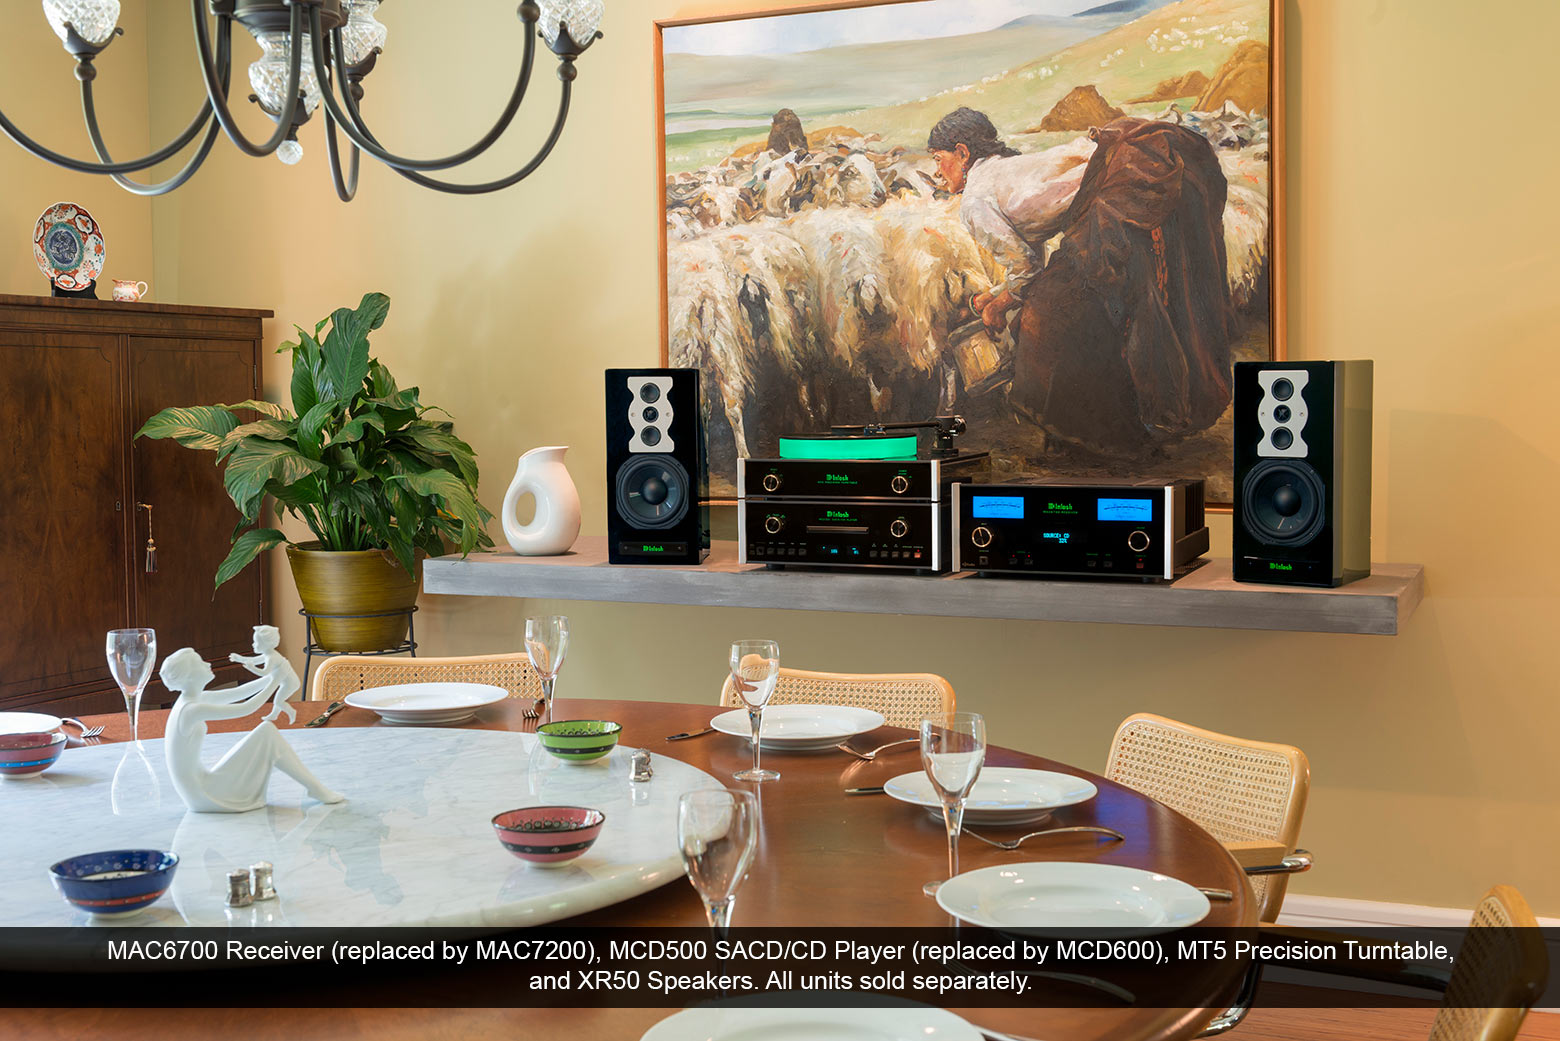 McIntosh MAC6700 Receiver, MCD500 SACD/CD Player, MT5 Precision Turntable, and XR50 Speakers